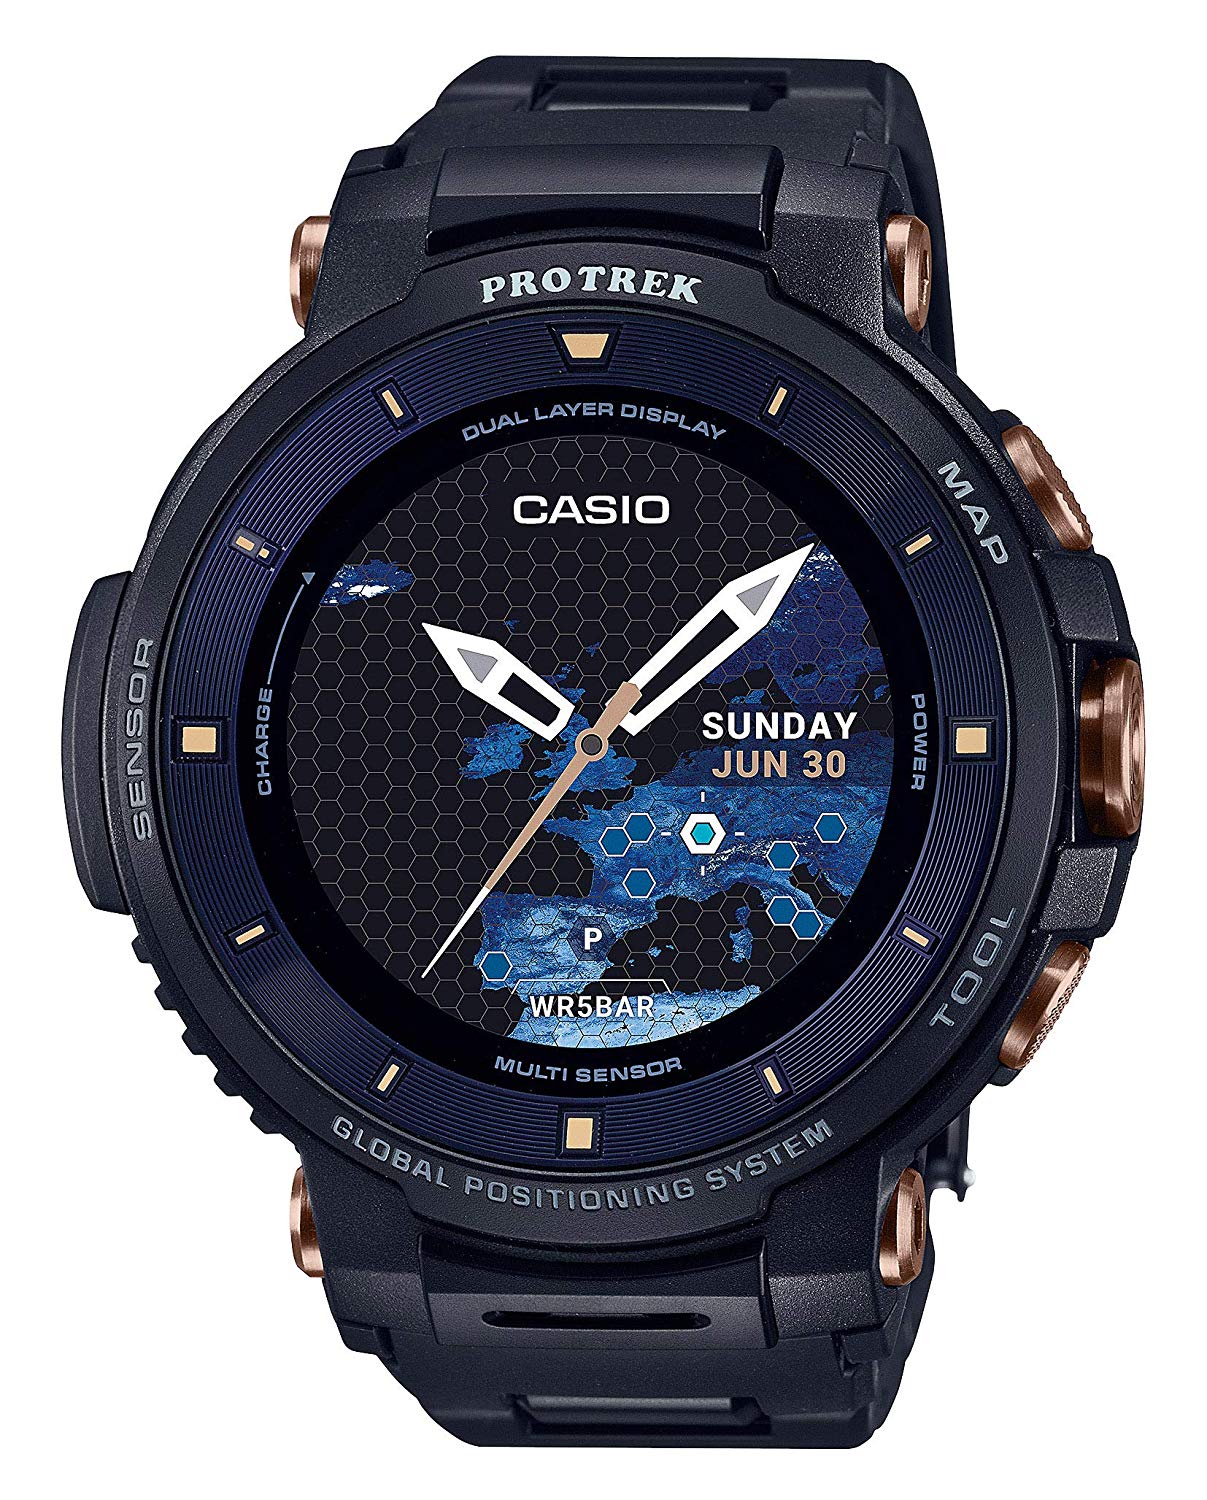 Casio Watch Smart Outdoor Watch Pro Trek Smart Gps Equipped Wsd F30sc Bk Men 39 S Black Discovery Japan Mall Shopping Japanese Products From Japan